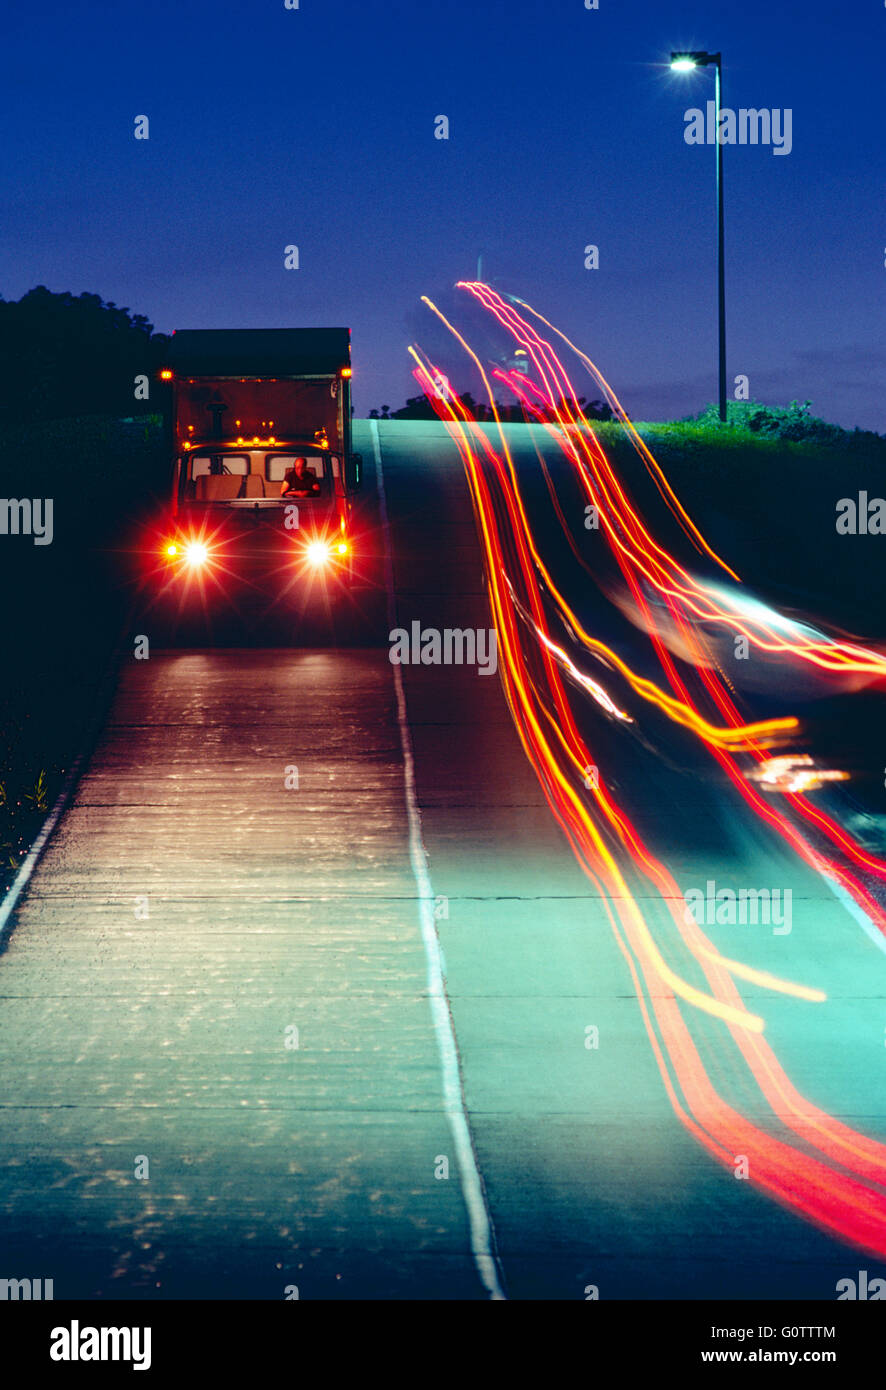 Trucks traveling on road at night  leave streaks of colorful lights Stock Photo